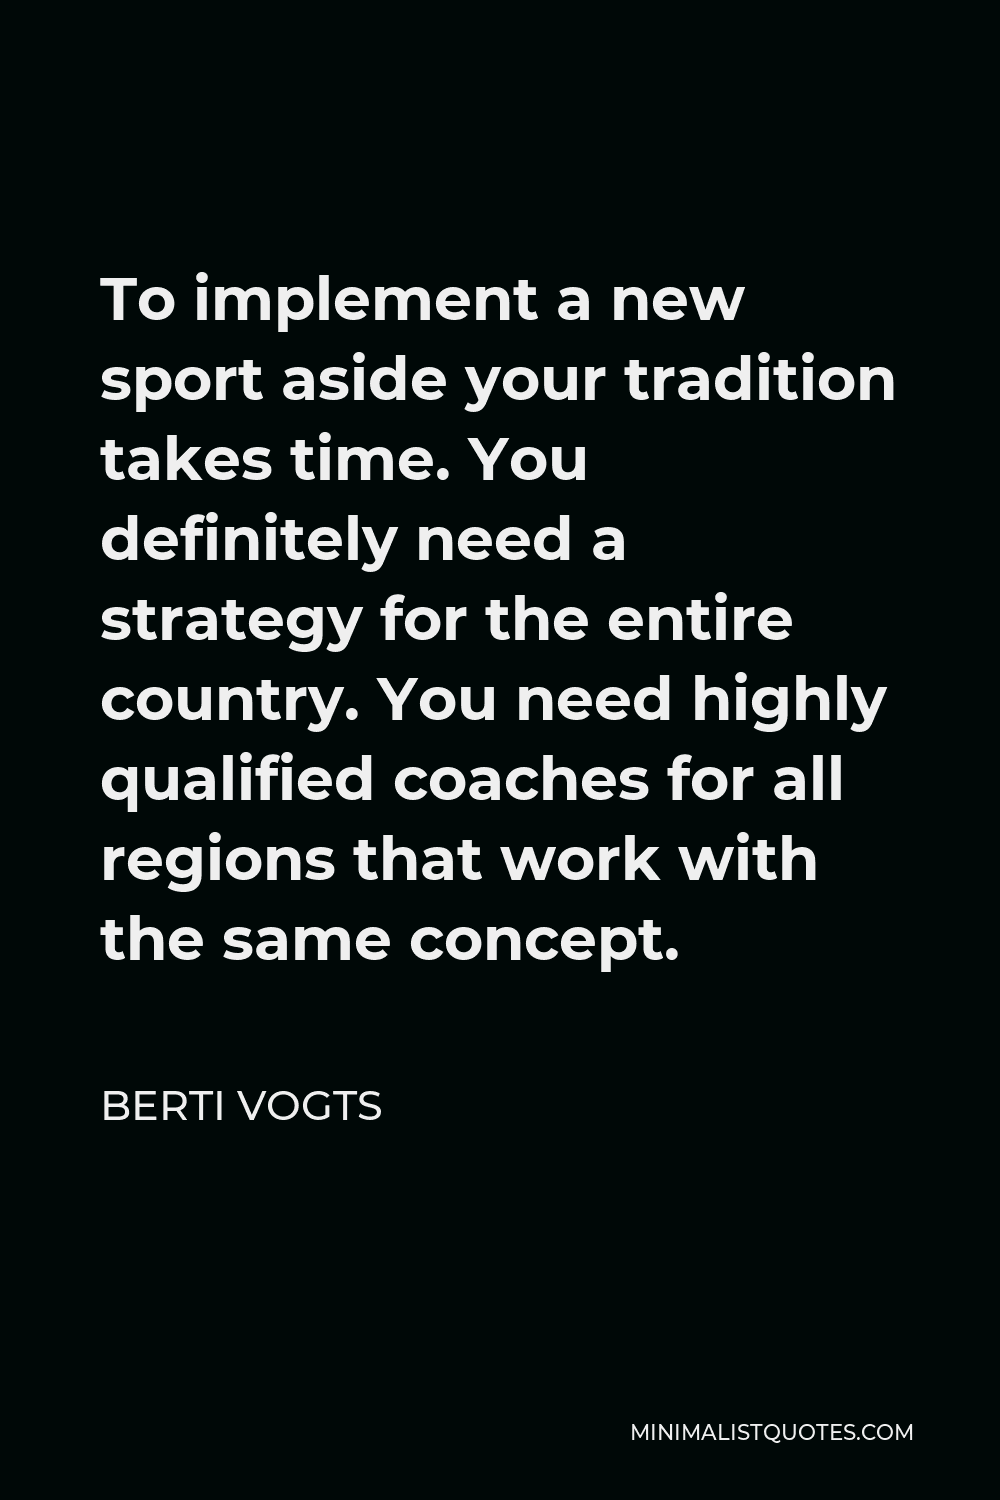 Berti Vogts Quote - To implement a new sport aside your tradition takes time. You definitely need a strategy for the entire country. You need highly qualified coaches for all regions that work with the same concept.